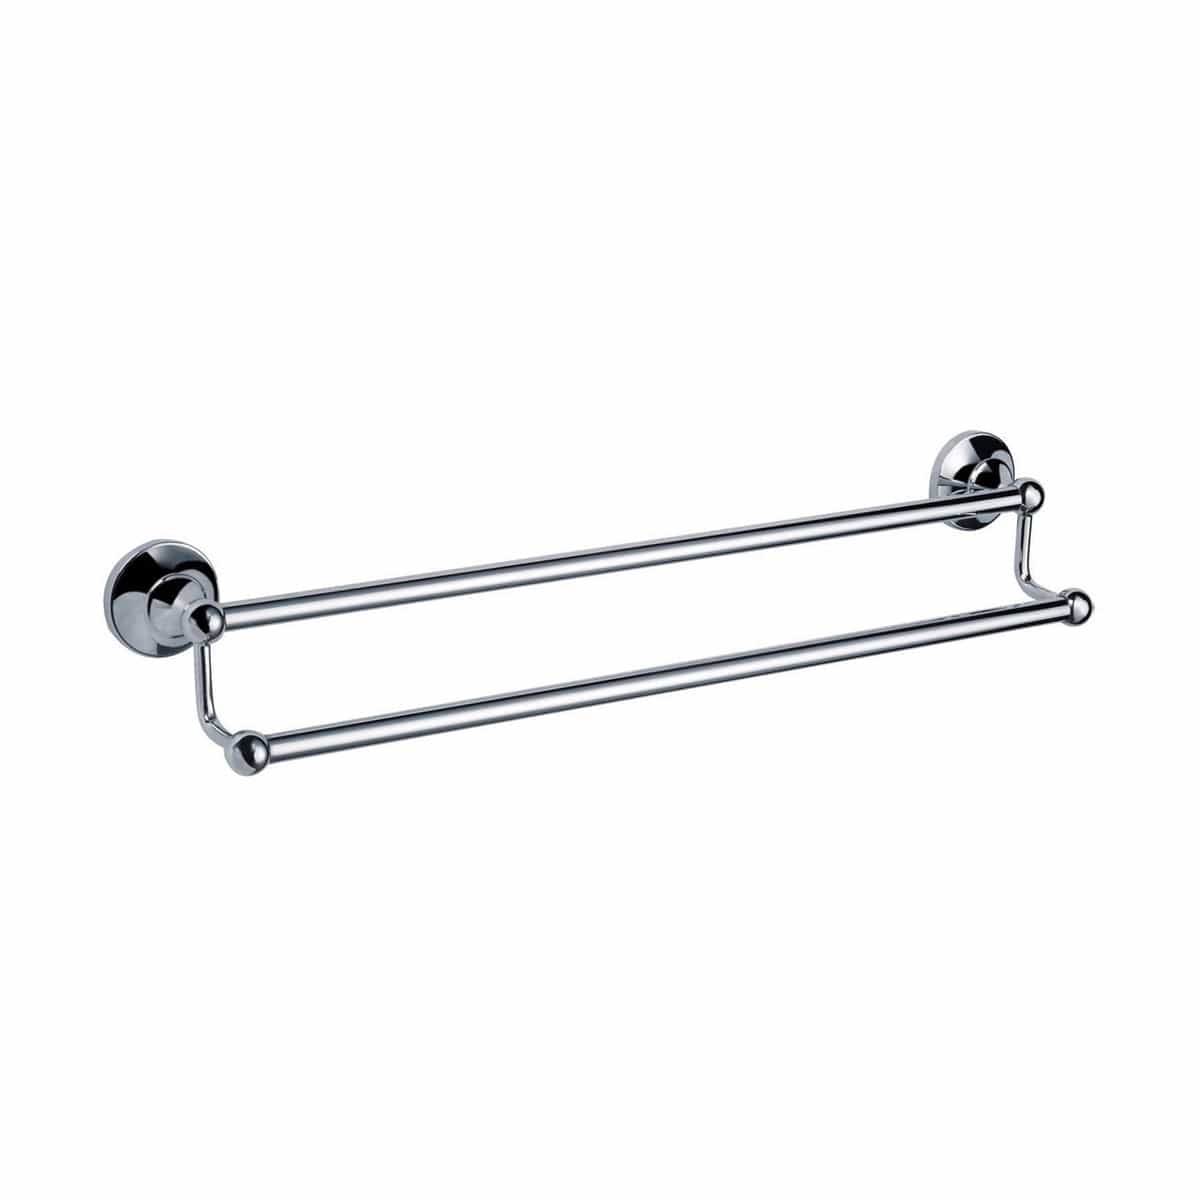 Shop Bathroom Copper Chrome Plated Two Bar Towel Rack - 7348 | Buy Online at Supply Master Accra, Ghana Bathroom Accessories Buy Tools hardware Building materials